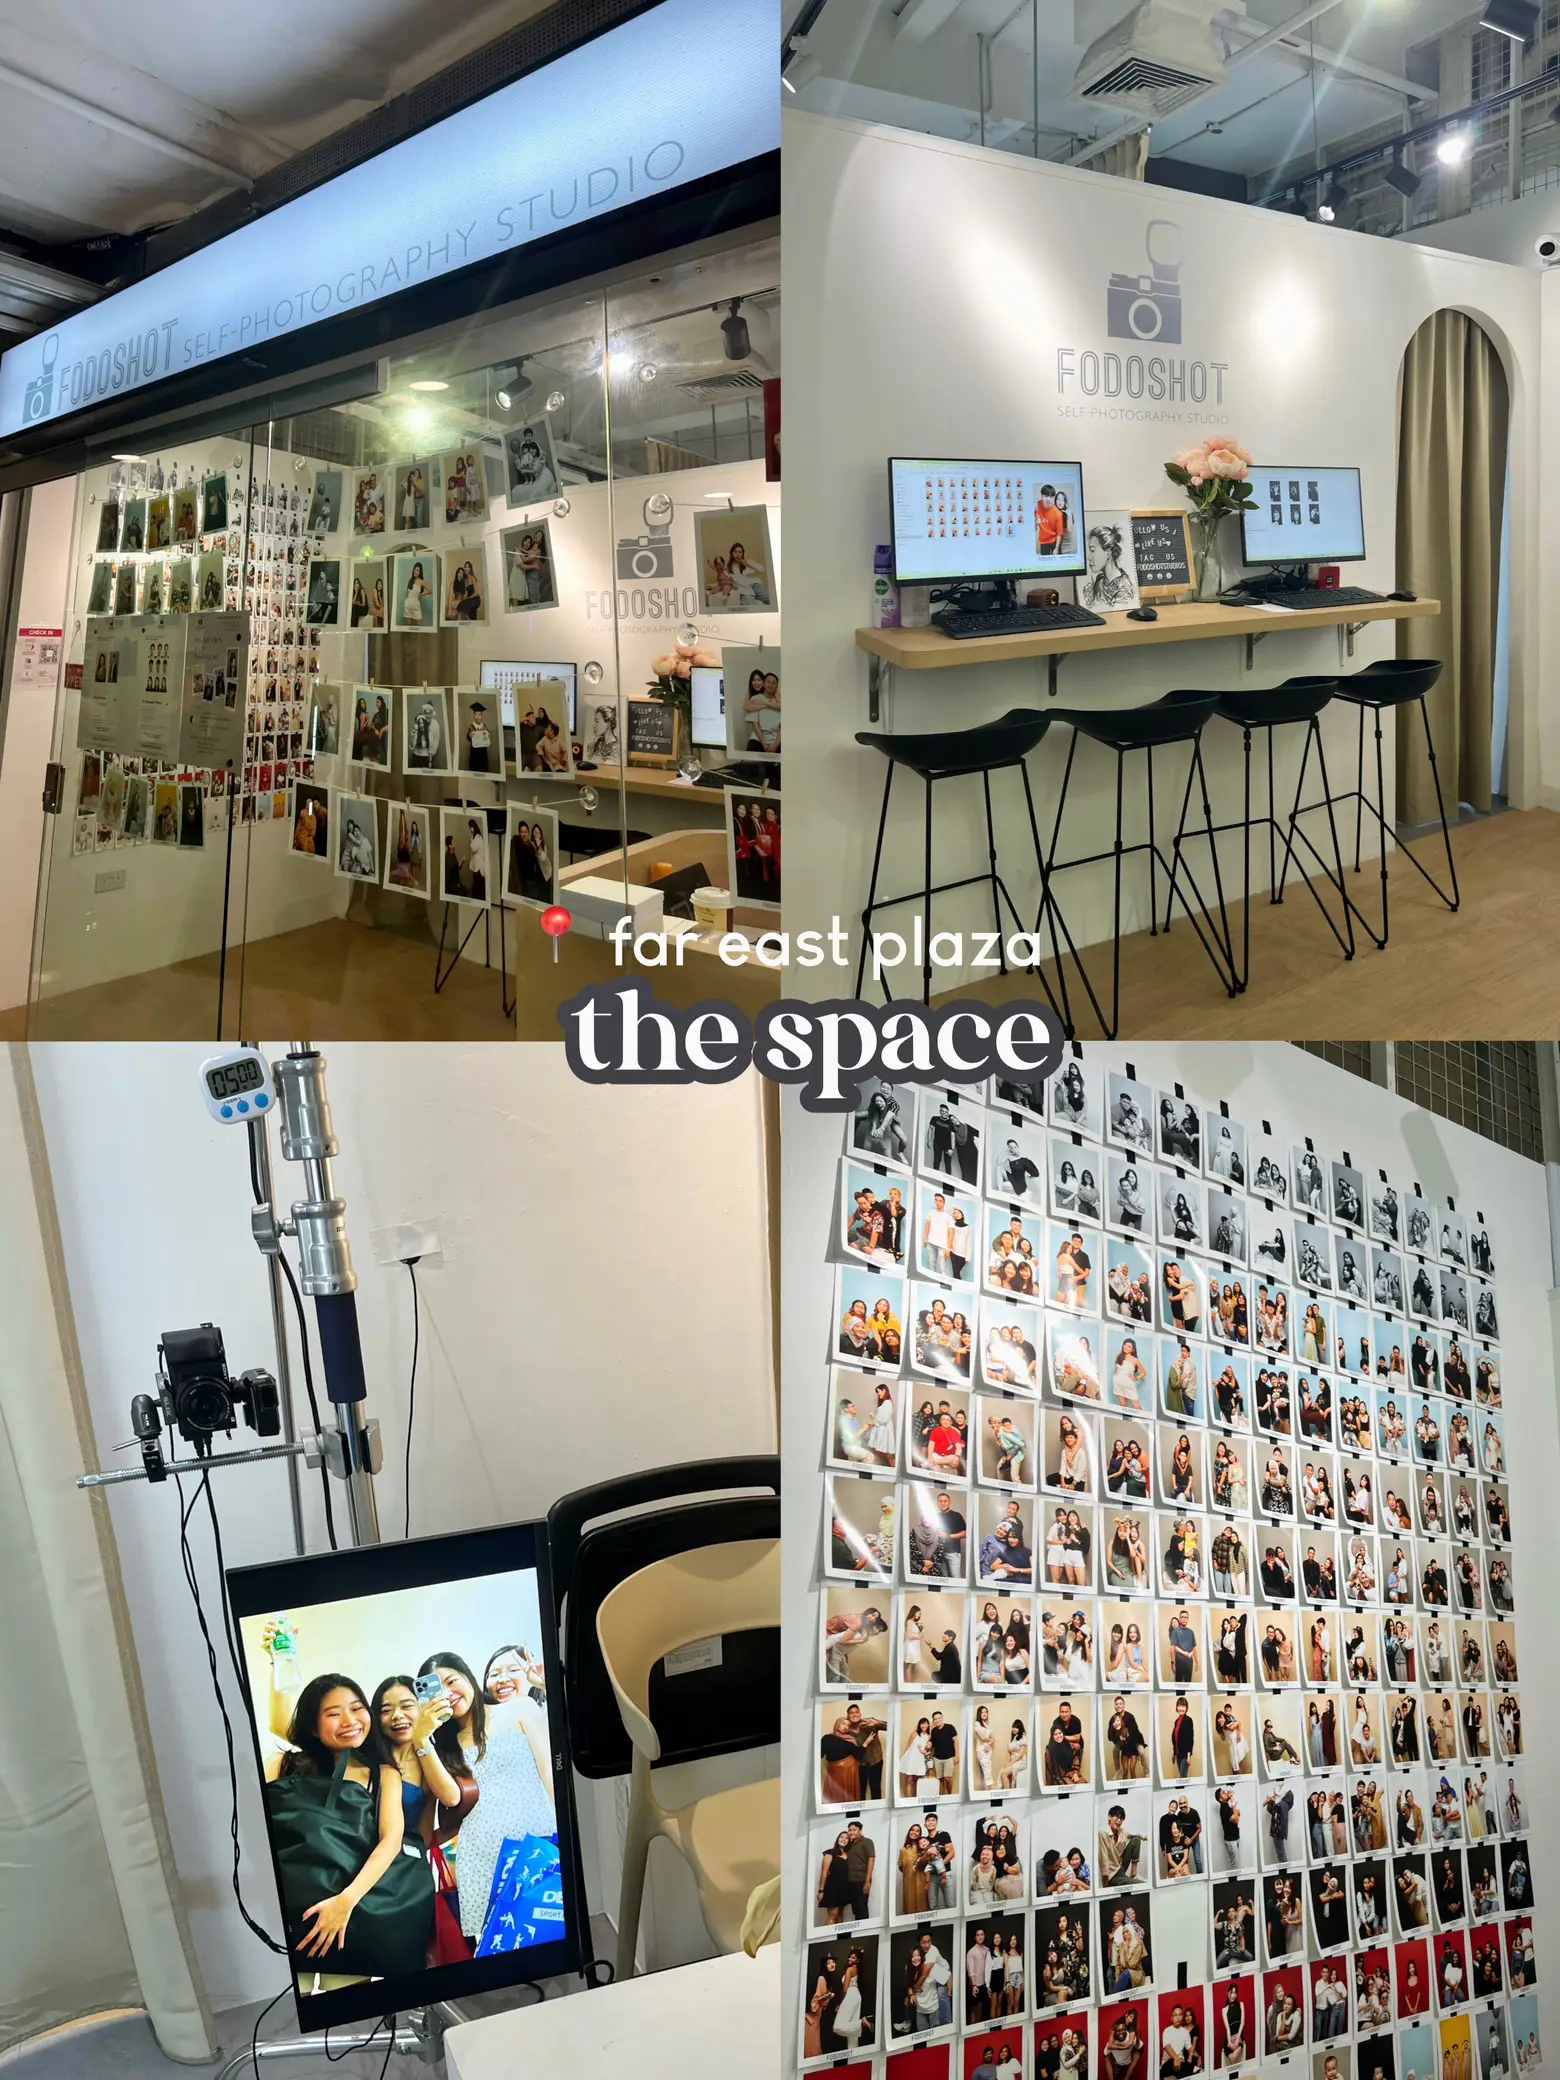 most value-for-money photo studio in town 😻's images(4)